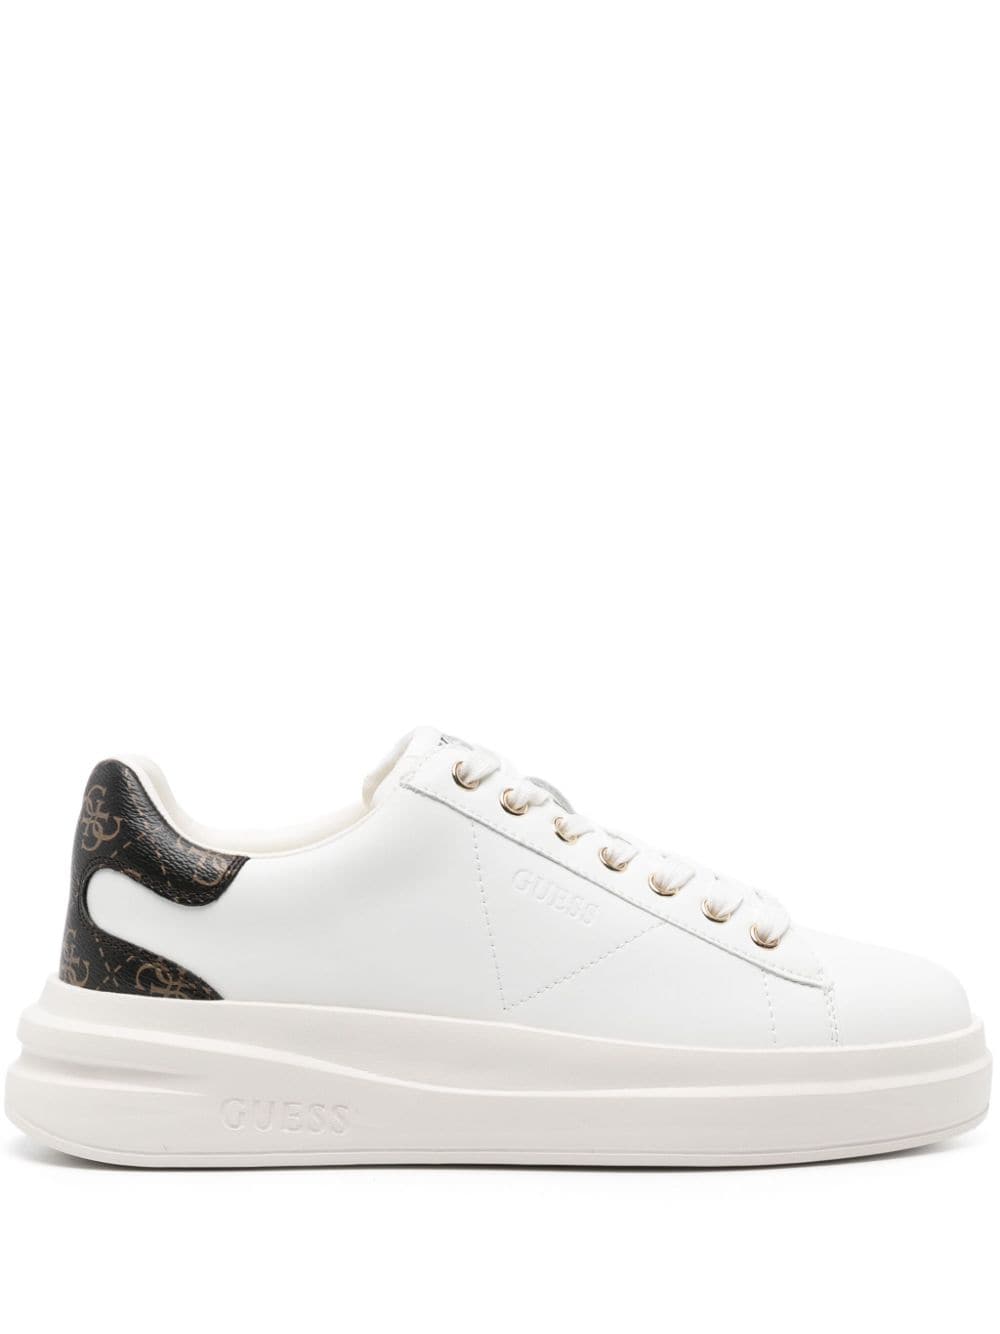 GUESS USA Elbina leather sneakers - White von GUESS USA